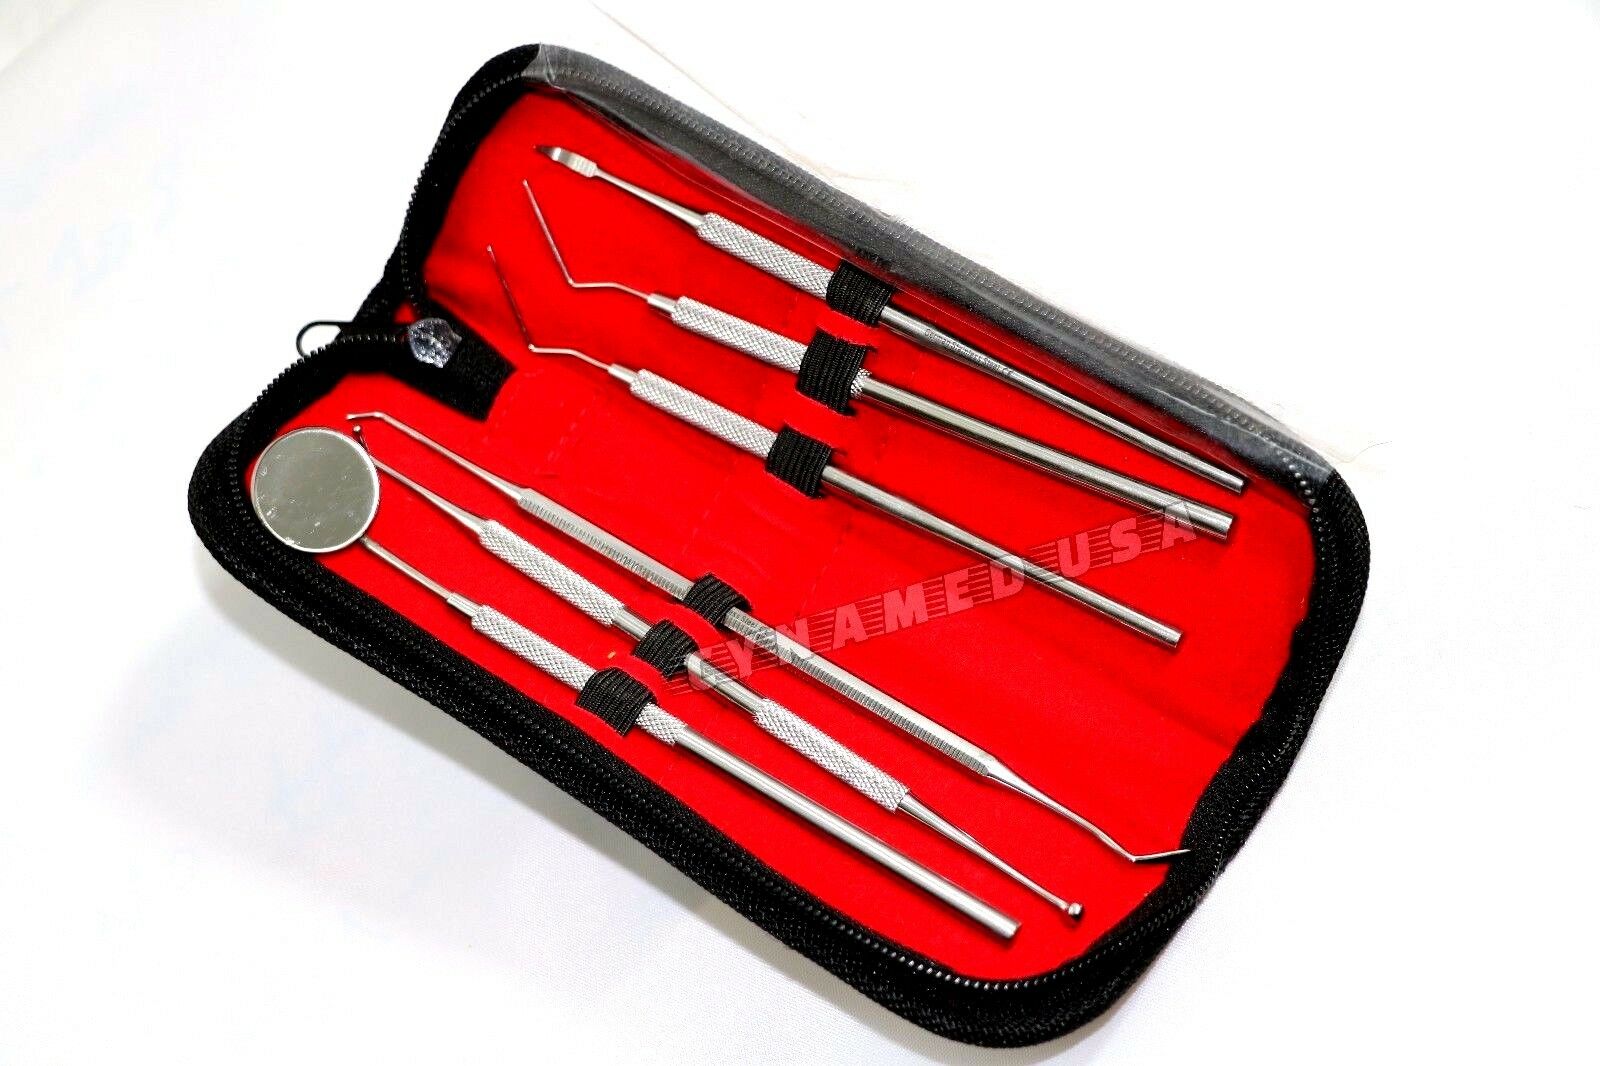 German Dental Scaler Pick Stainless Steel Tools With Inspection Mirror Set 6 Pcs